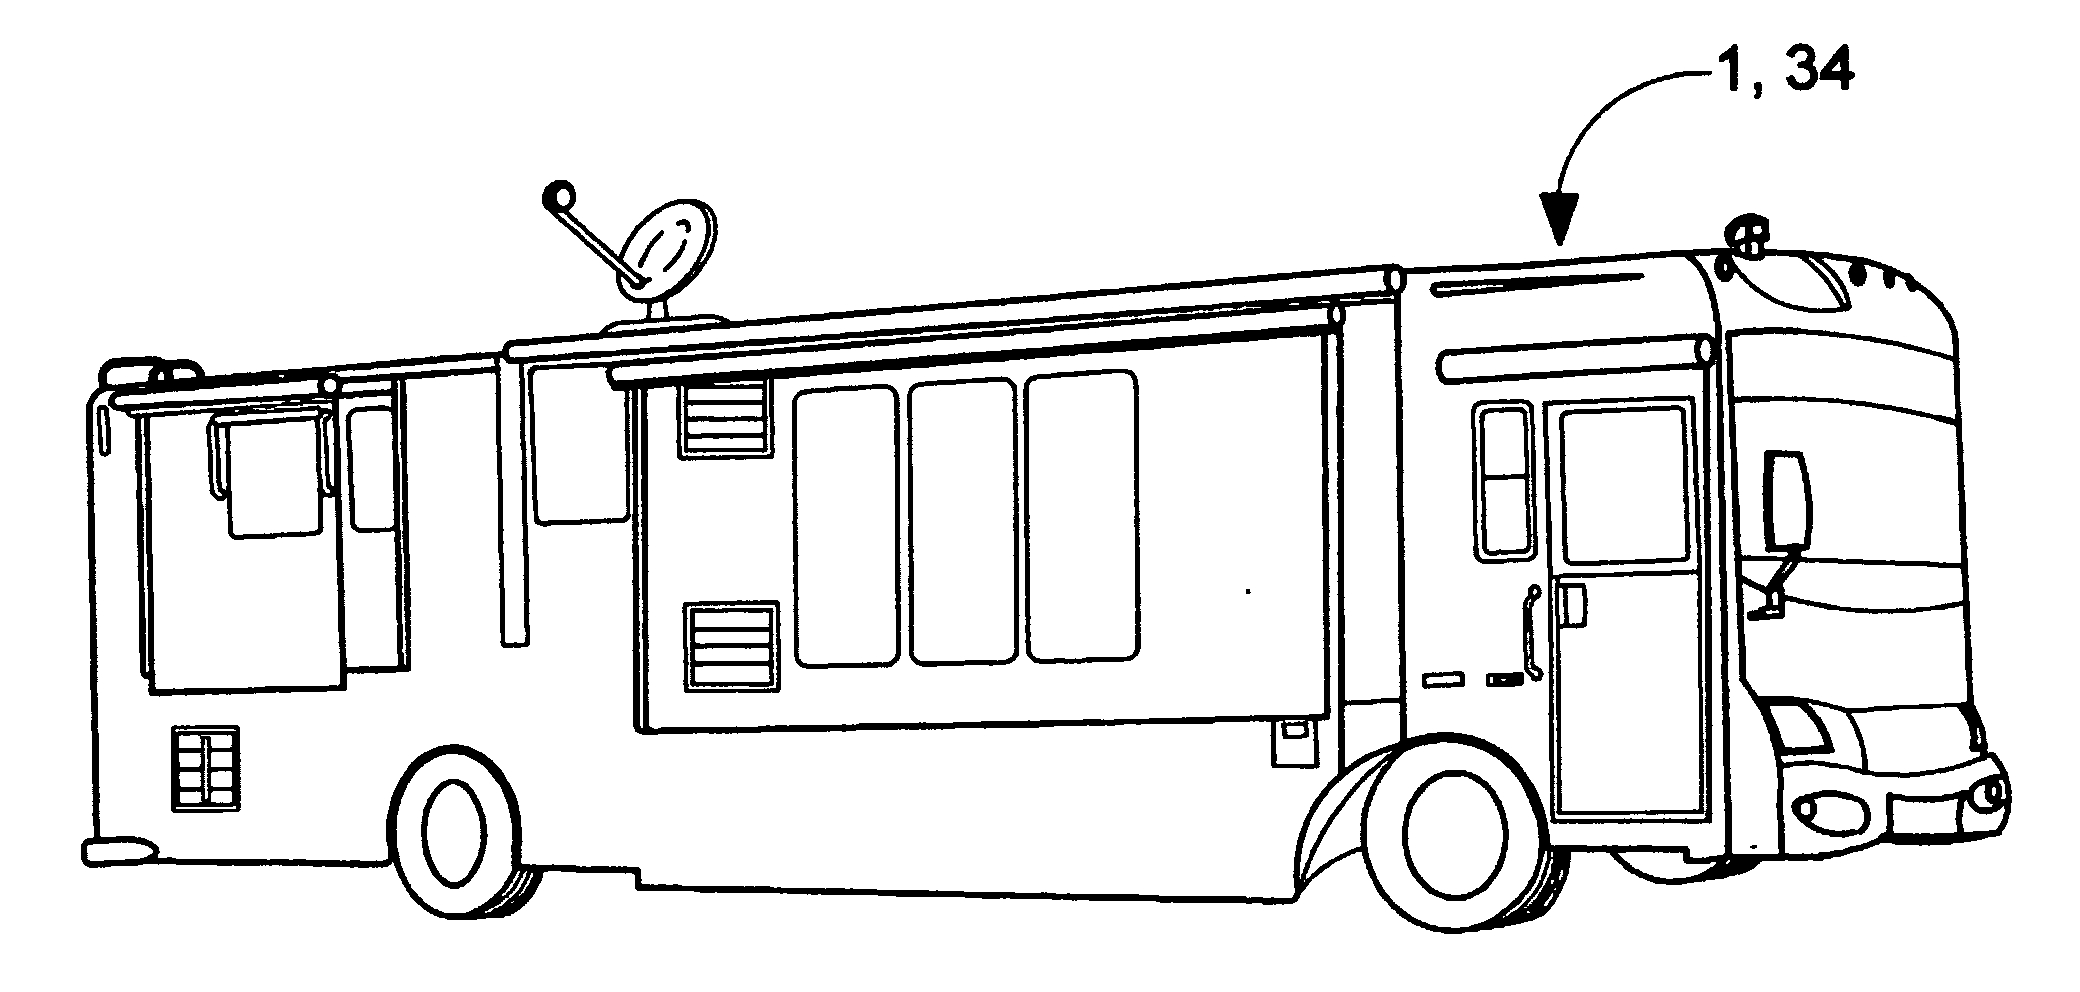 Vehicle and method for mobile hair care center